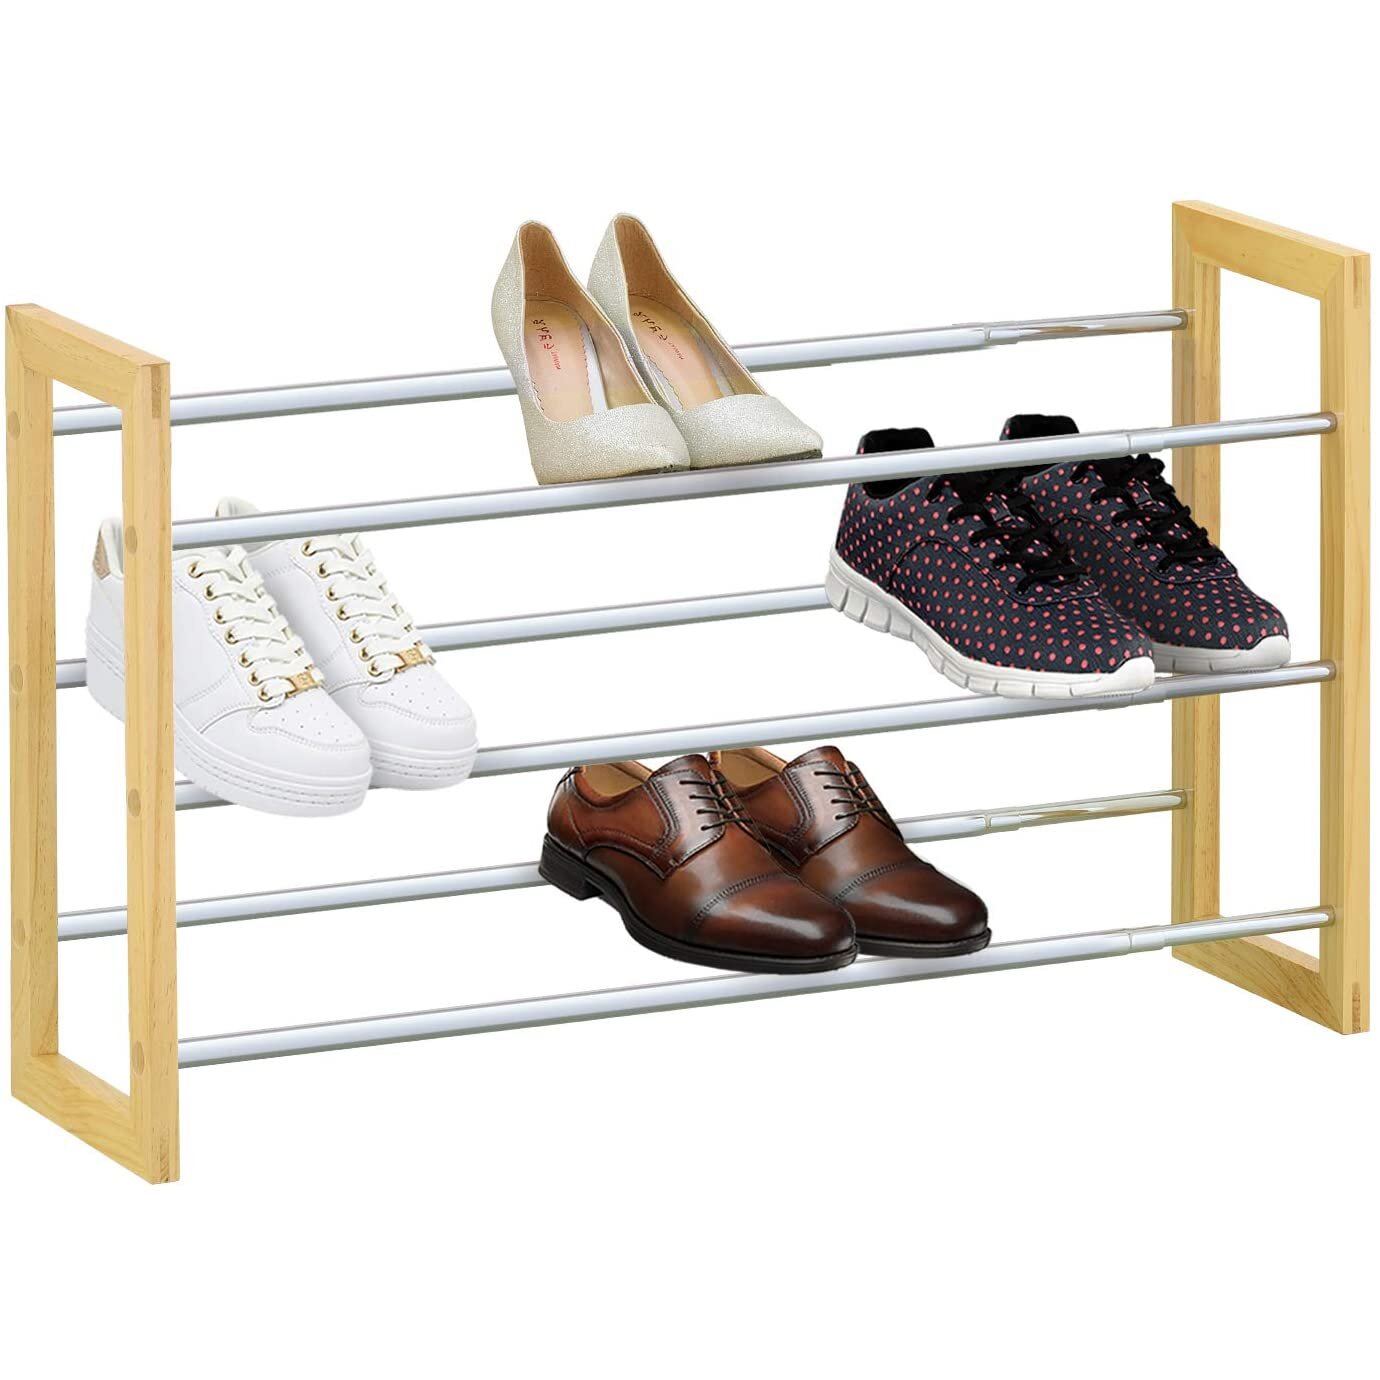 KNIGHT 3 Tier Shoe Rack Extendable Chrome Plated Metal with Pinewood Frame Holds up to 18 Pairs of Shoes, Easy Assemble ,Hex Key Required (Provided)